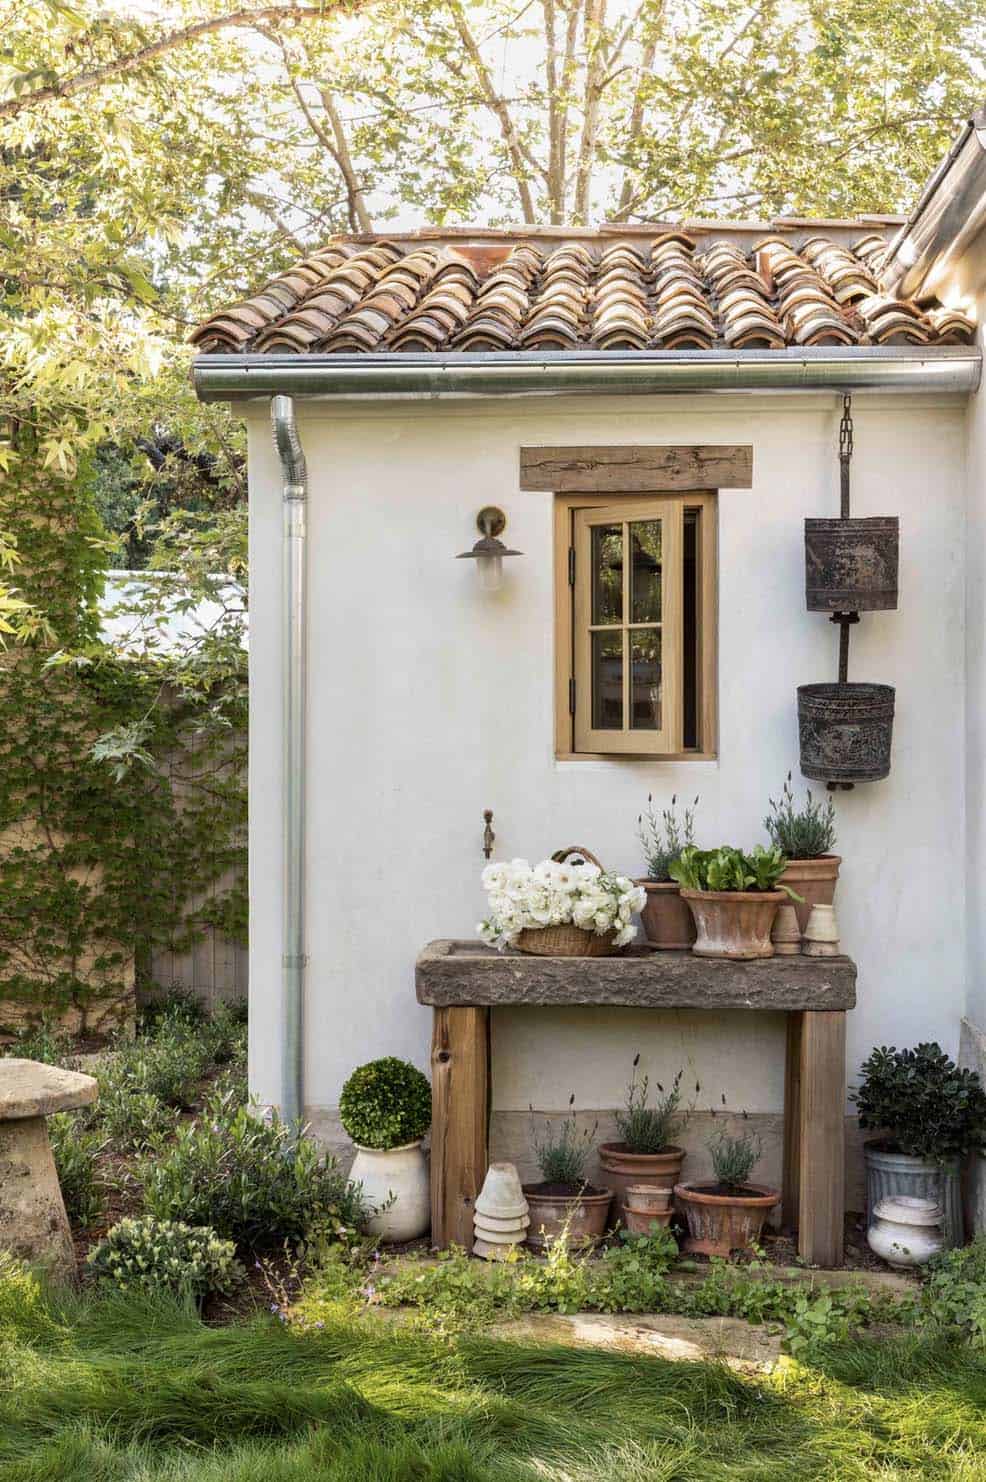 European-inspired country home potting bench